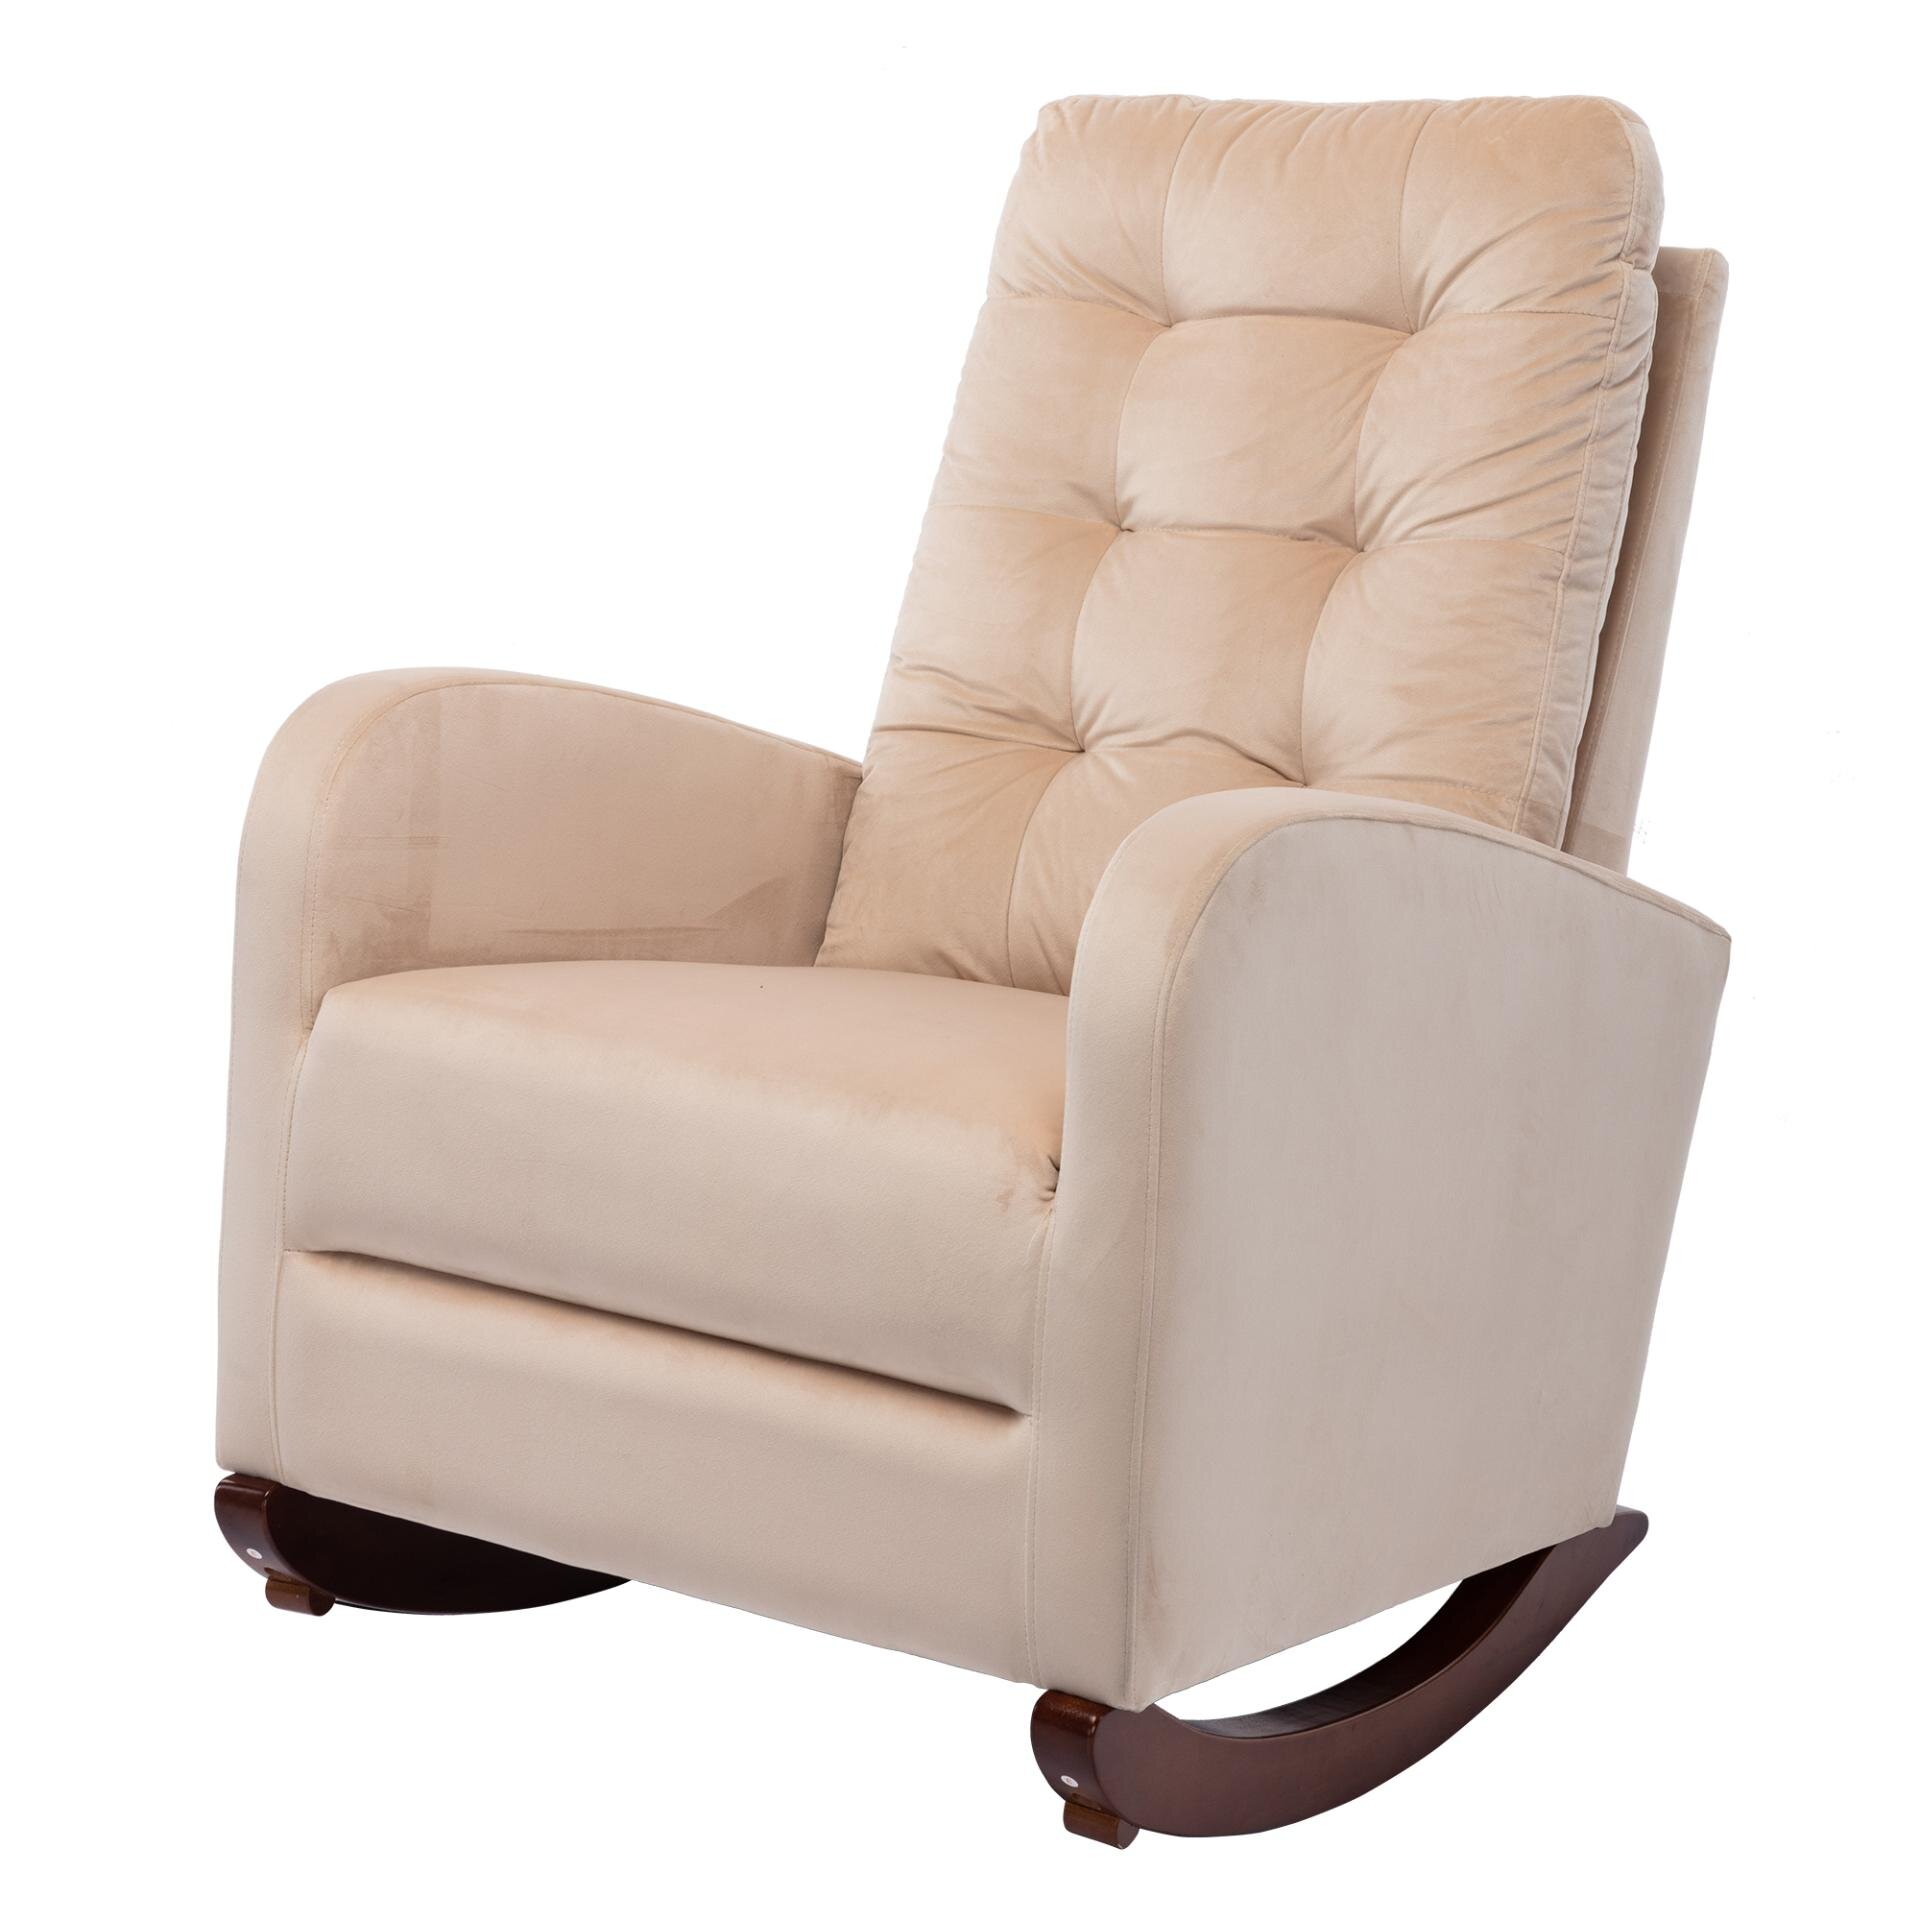 Upholstered Rocker Chair - Buy Gymax 2 In 1 Fabric Upholstered Rocking Chair Nursery Armchair With Pillow Beige By Gymax On Dot Bo / We did not find results for: